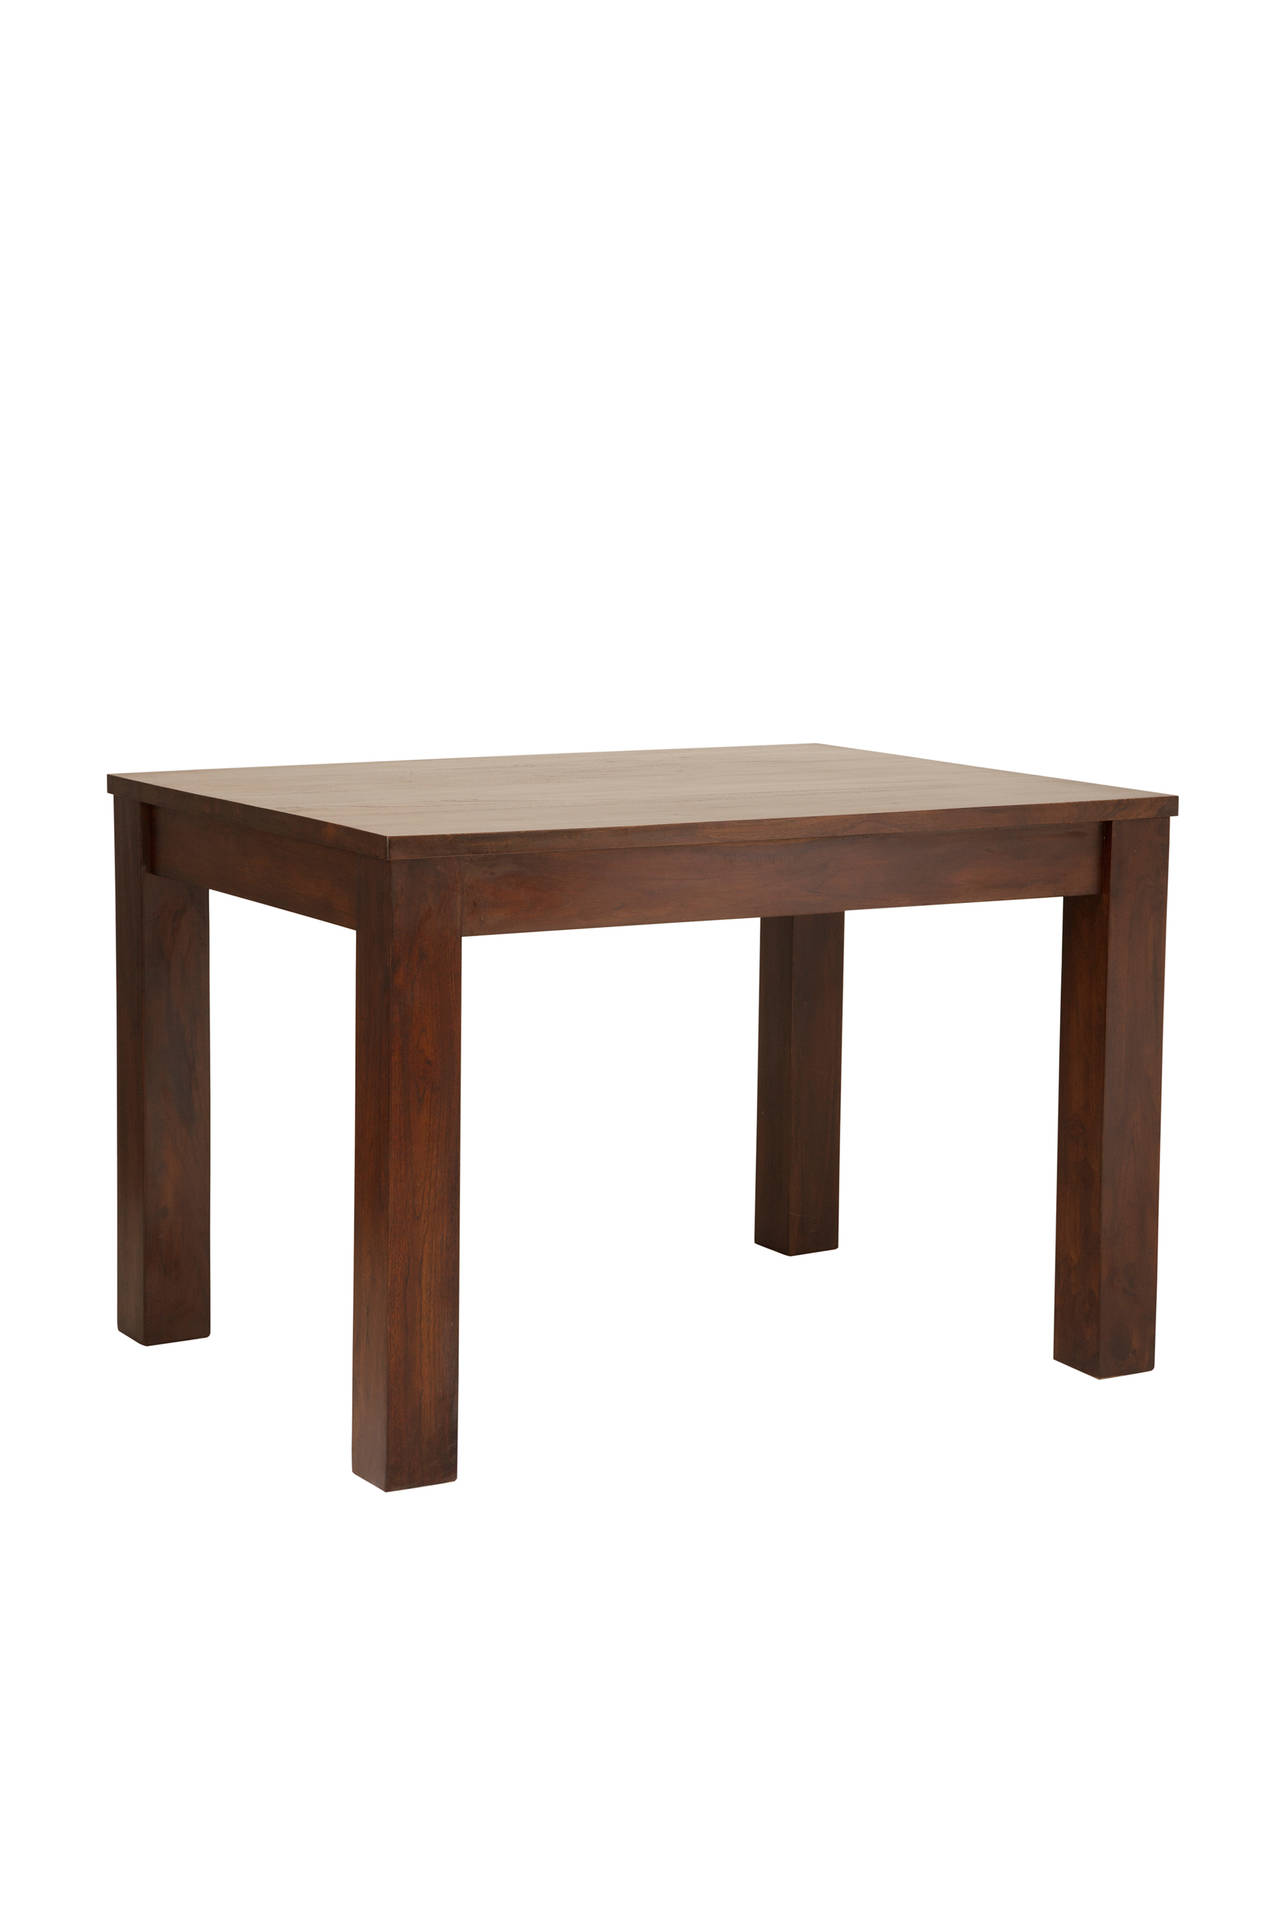 STRAIGHT DINING TABLE 120